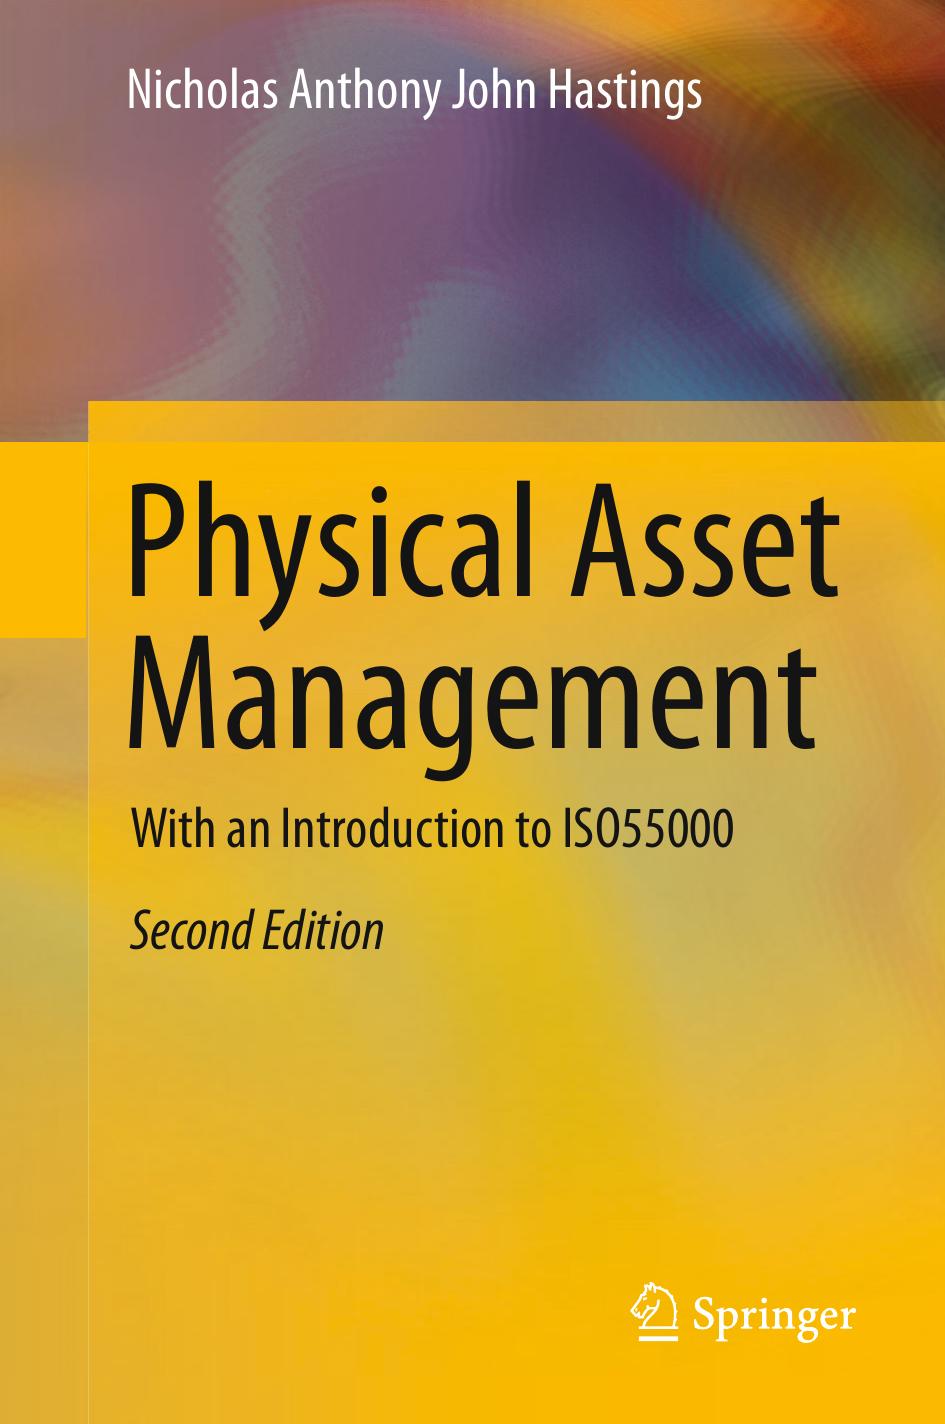 Physical Asset Management by Nicholas Anthony John Hastings